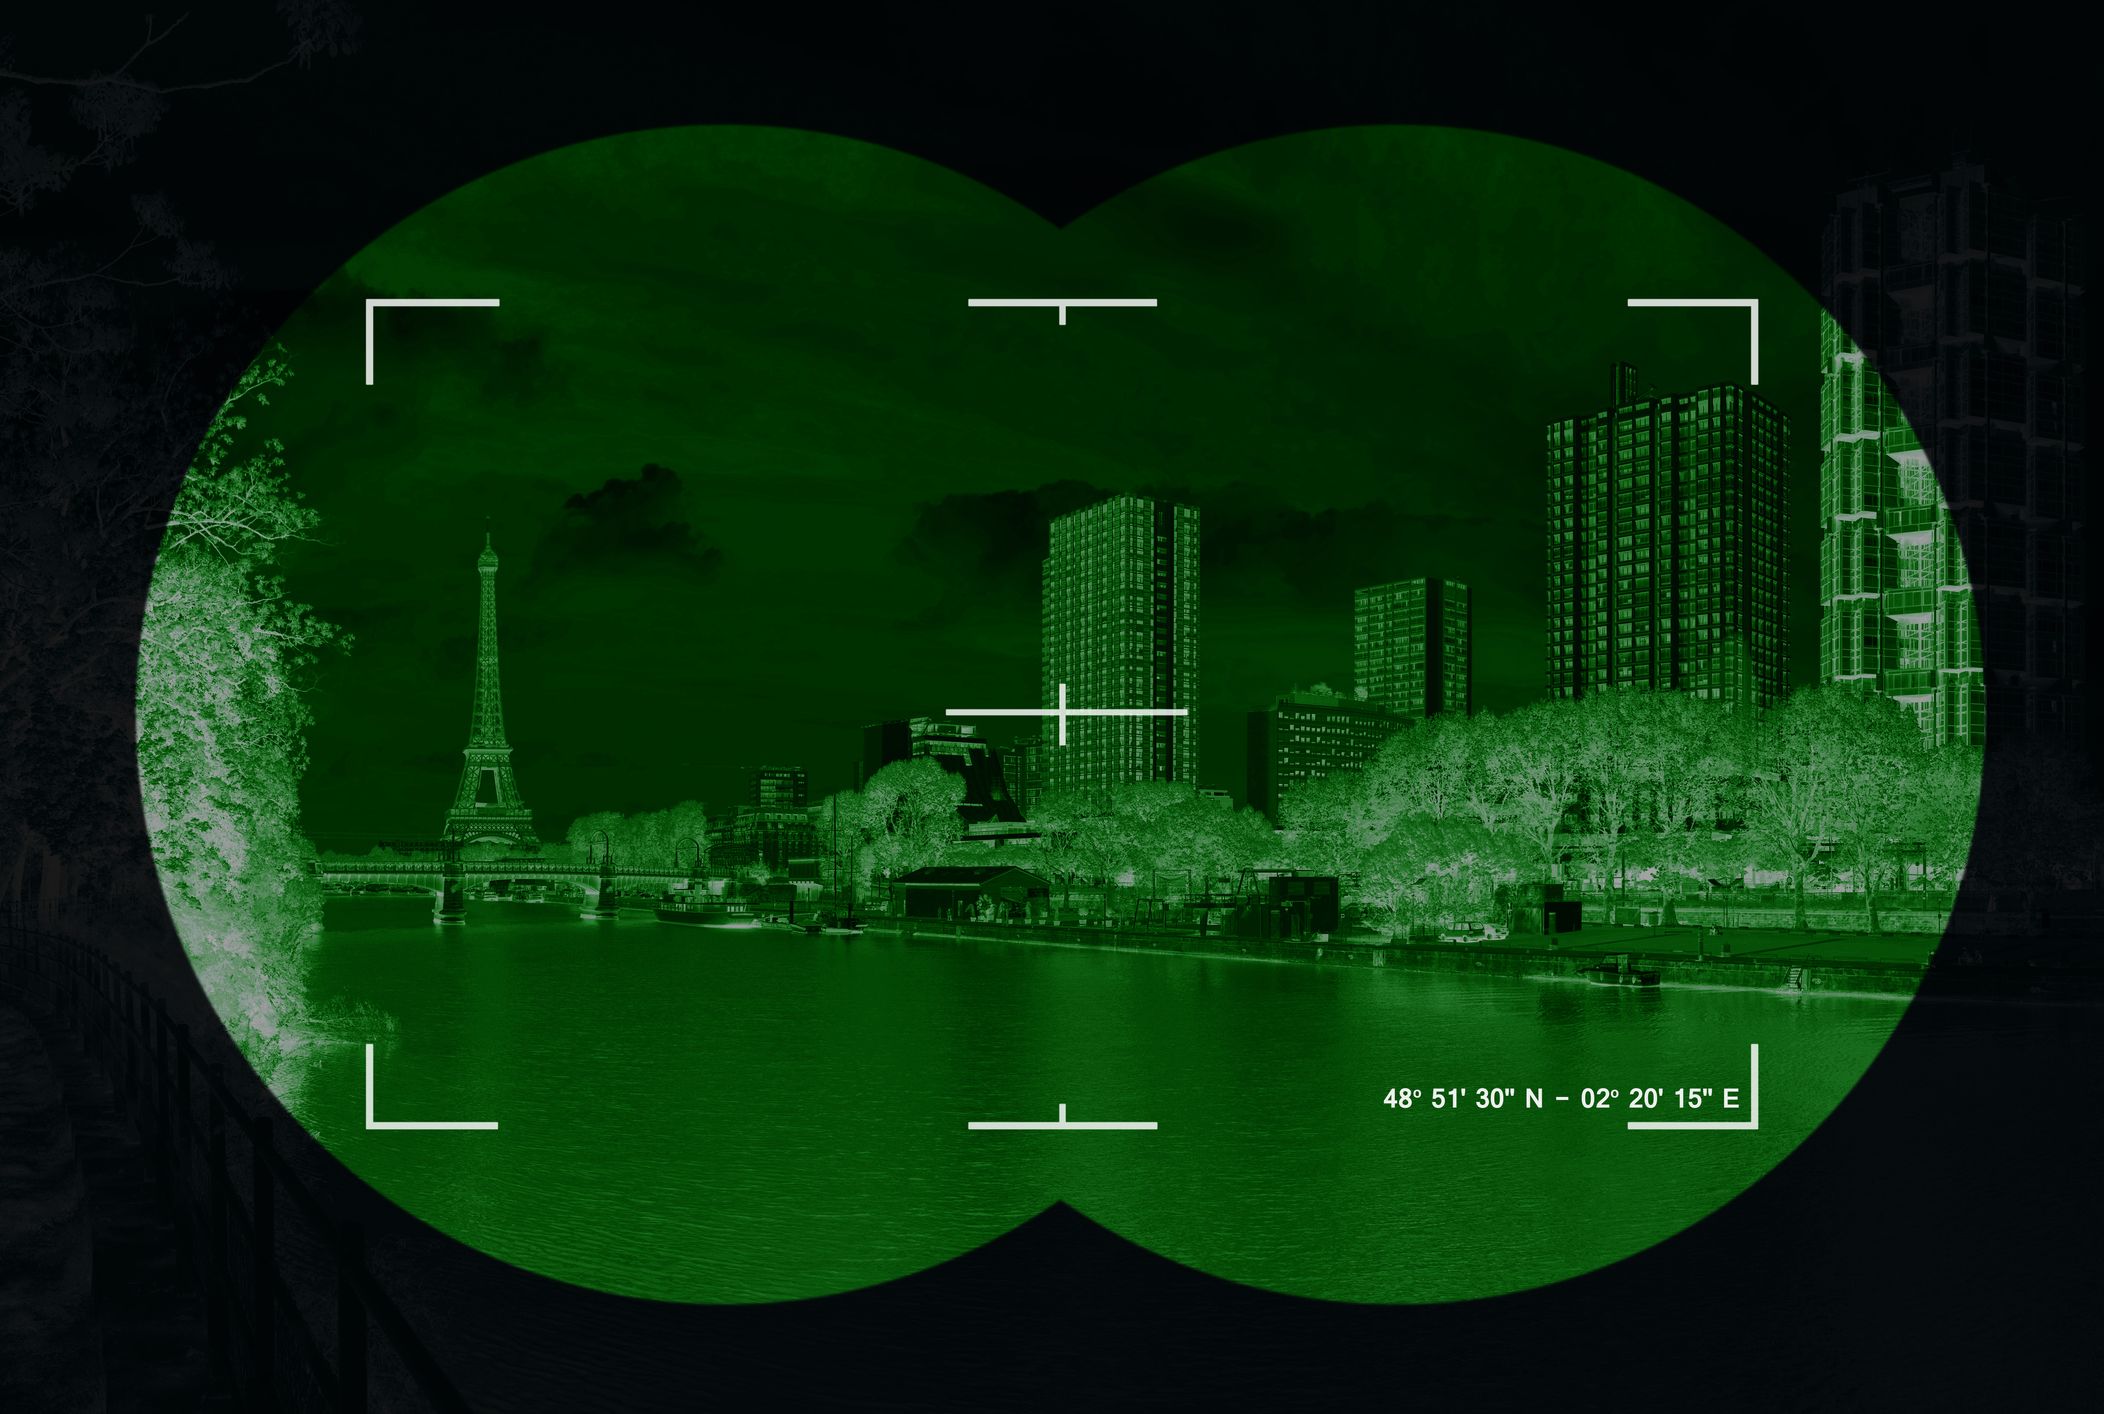 Night Vision Binoculars: How They Work and Their Applications